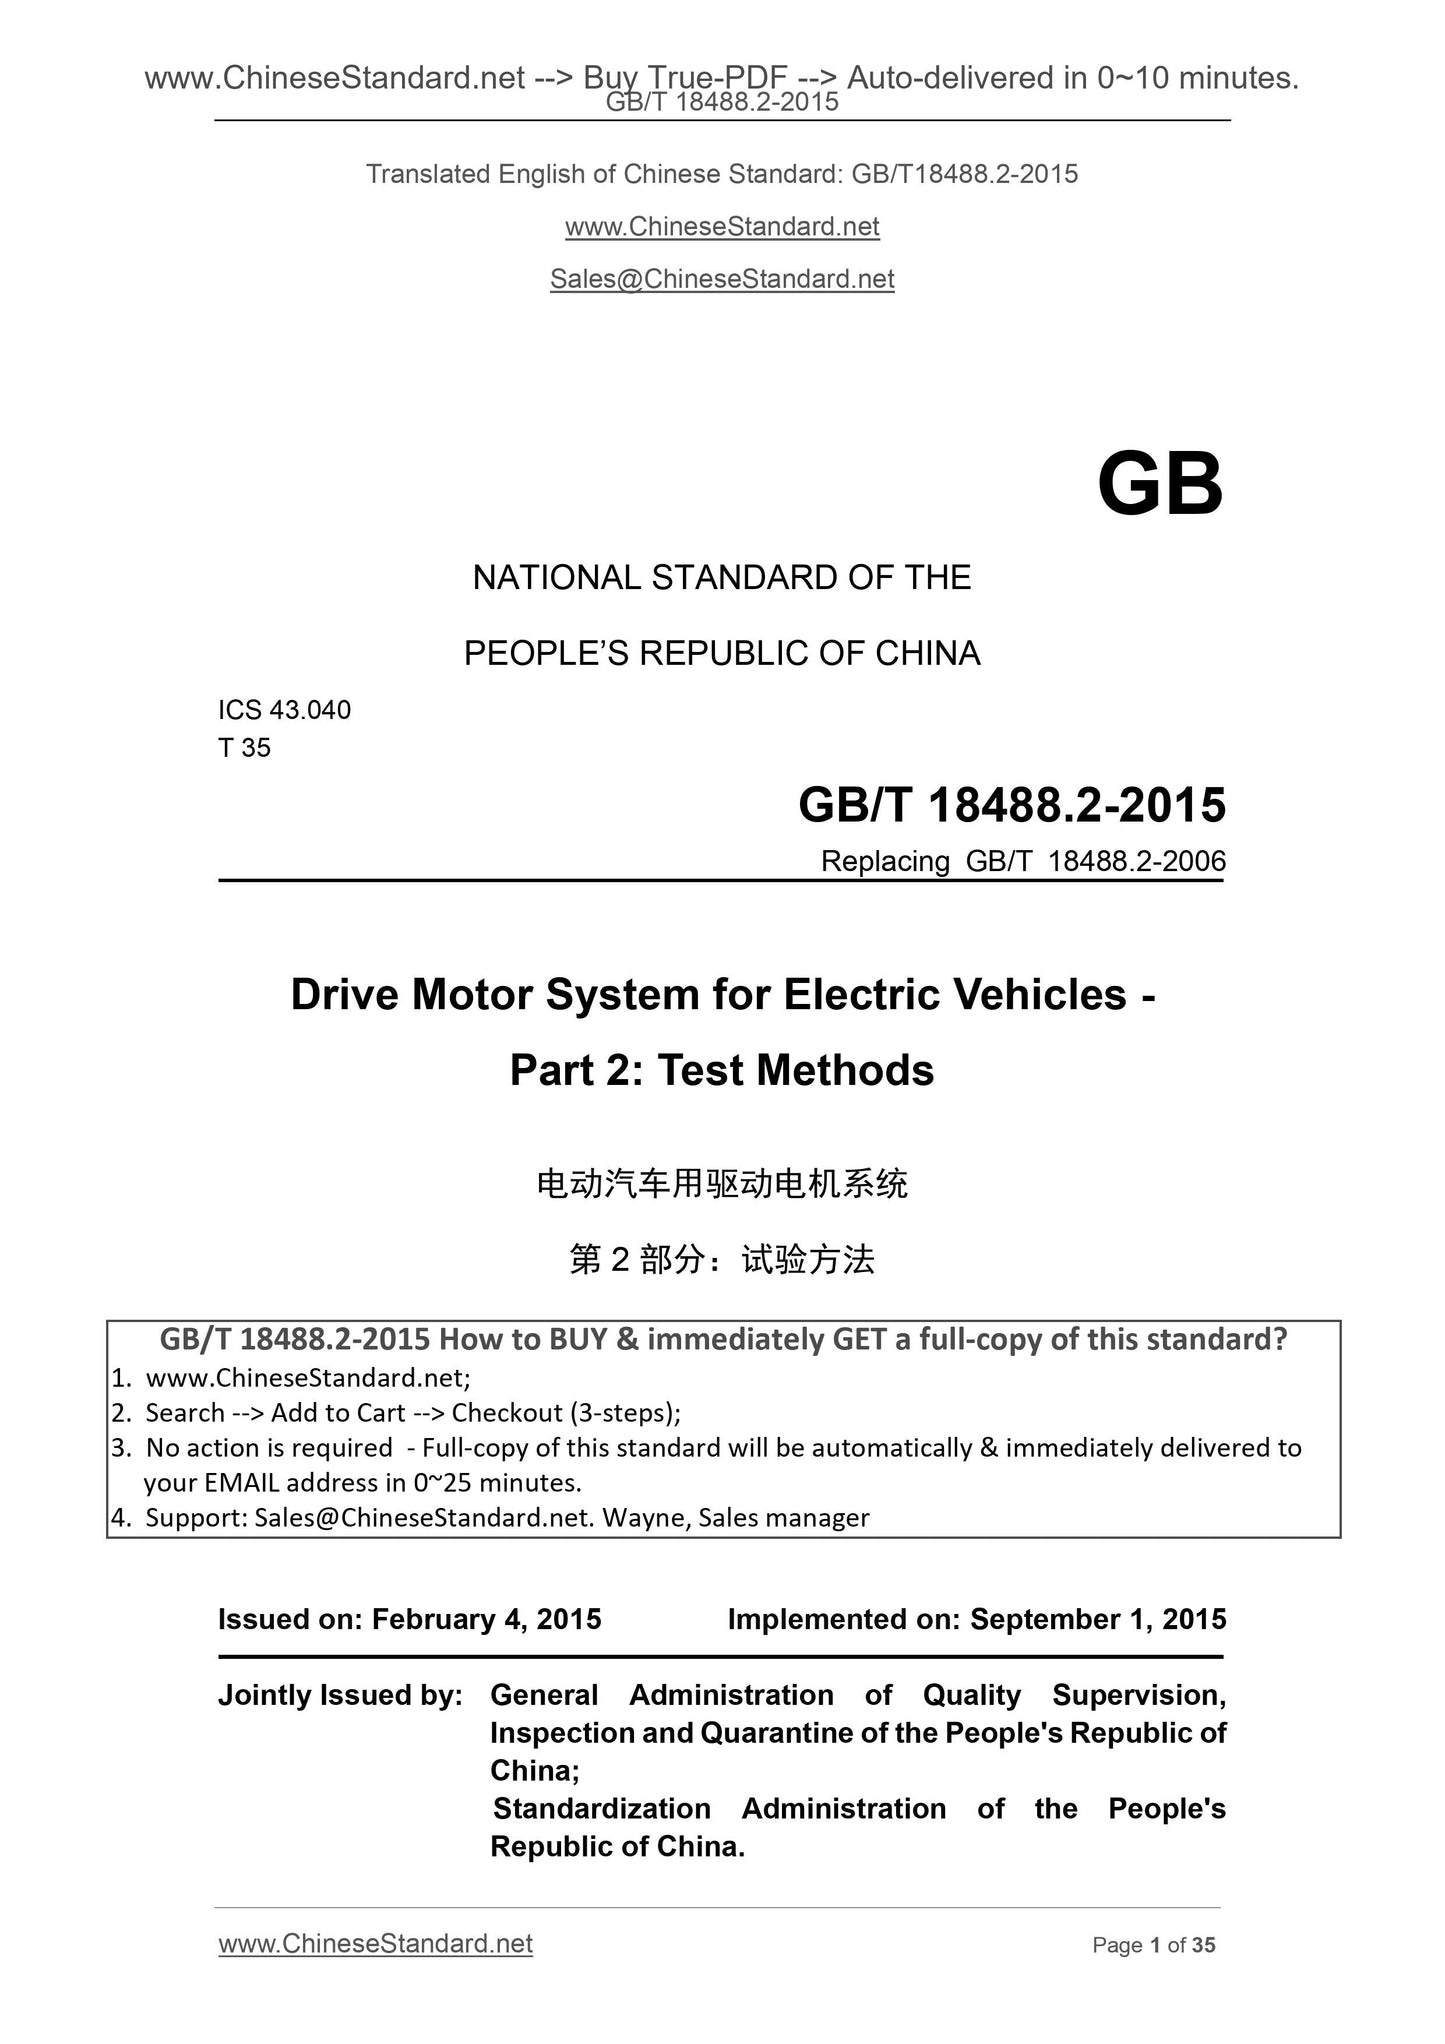 GB/T 18488.2-2015 Page 1